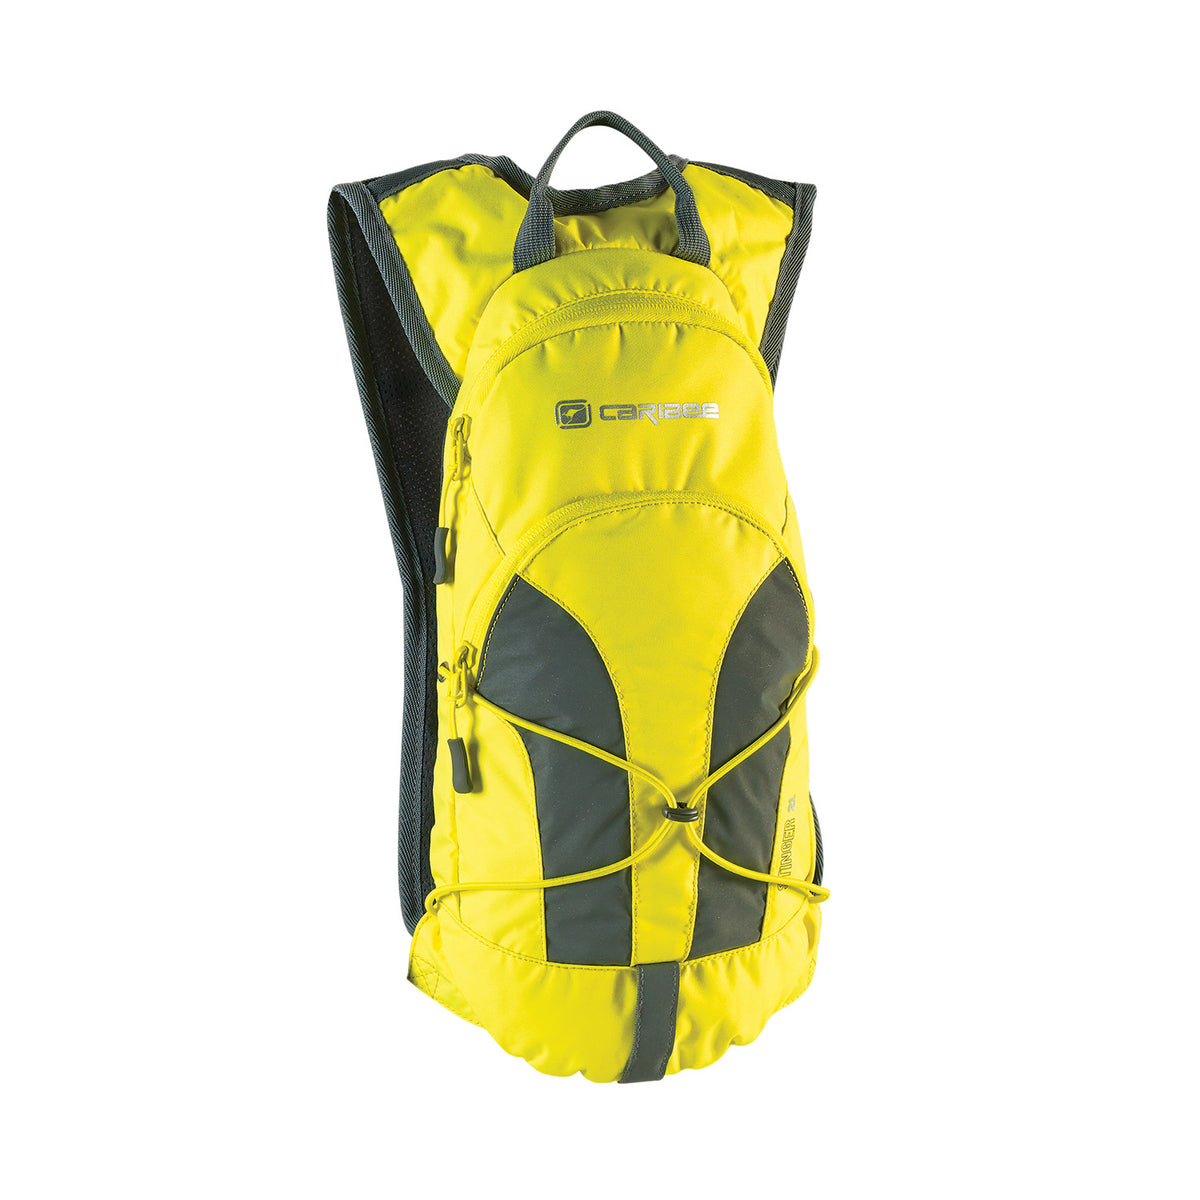 Hydration Packs and Hydration Compatible Packs